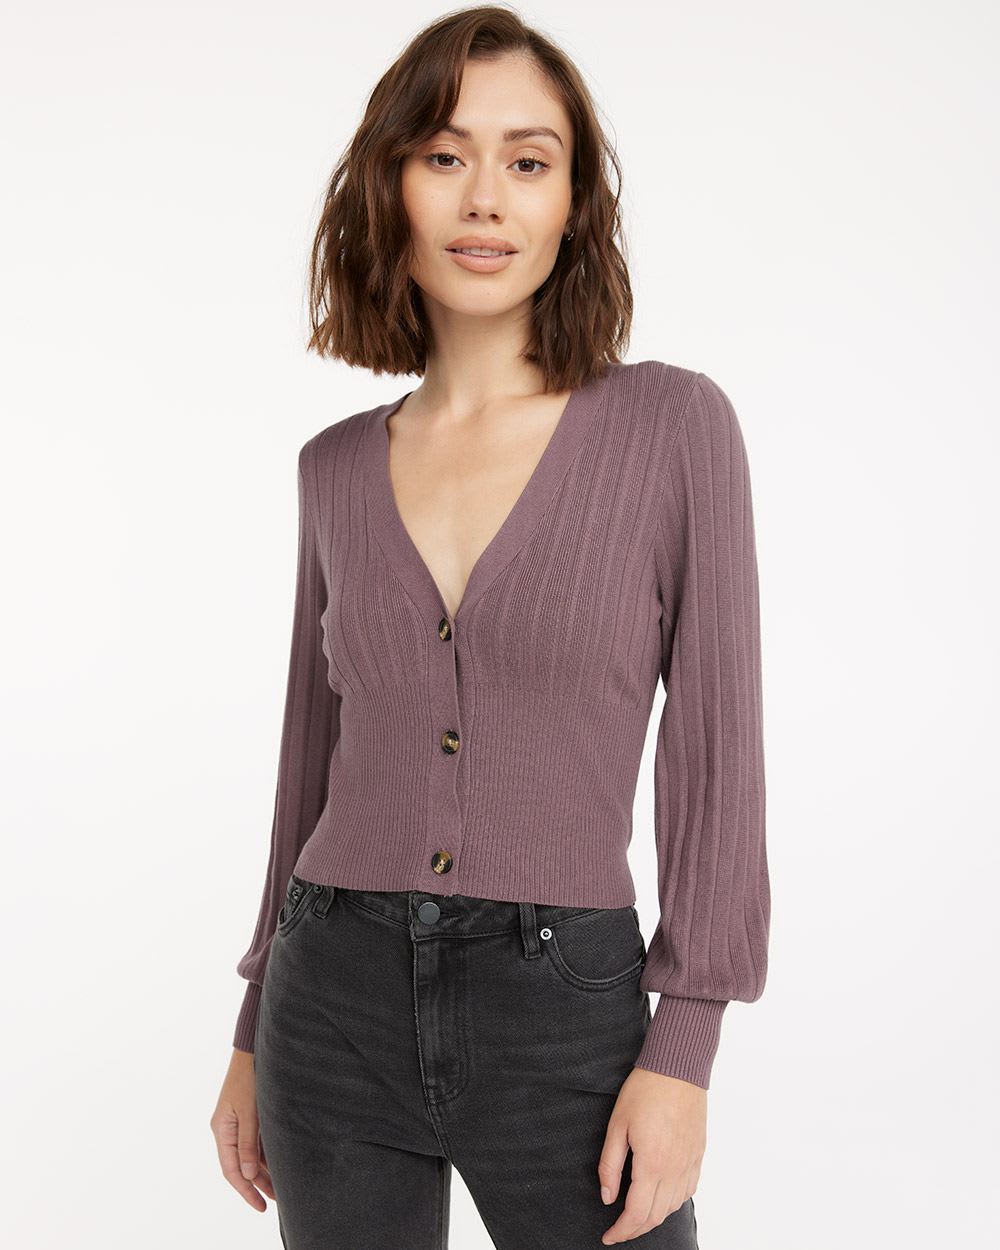 Fitted Cardigan with Deep V Neckline